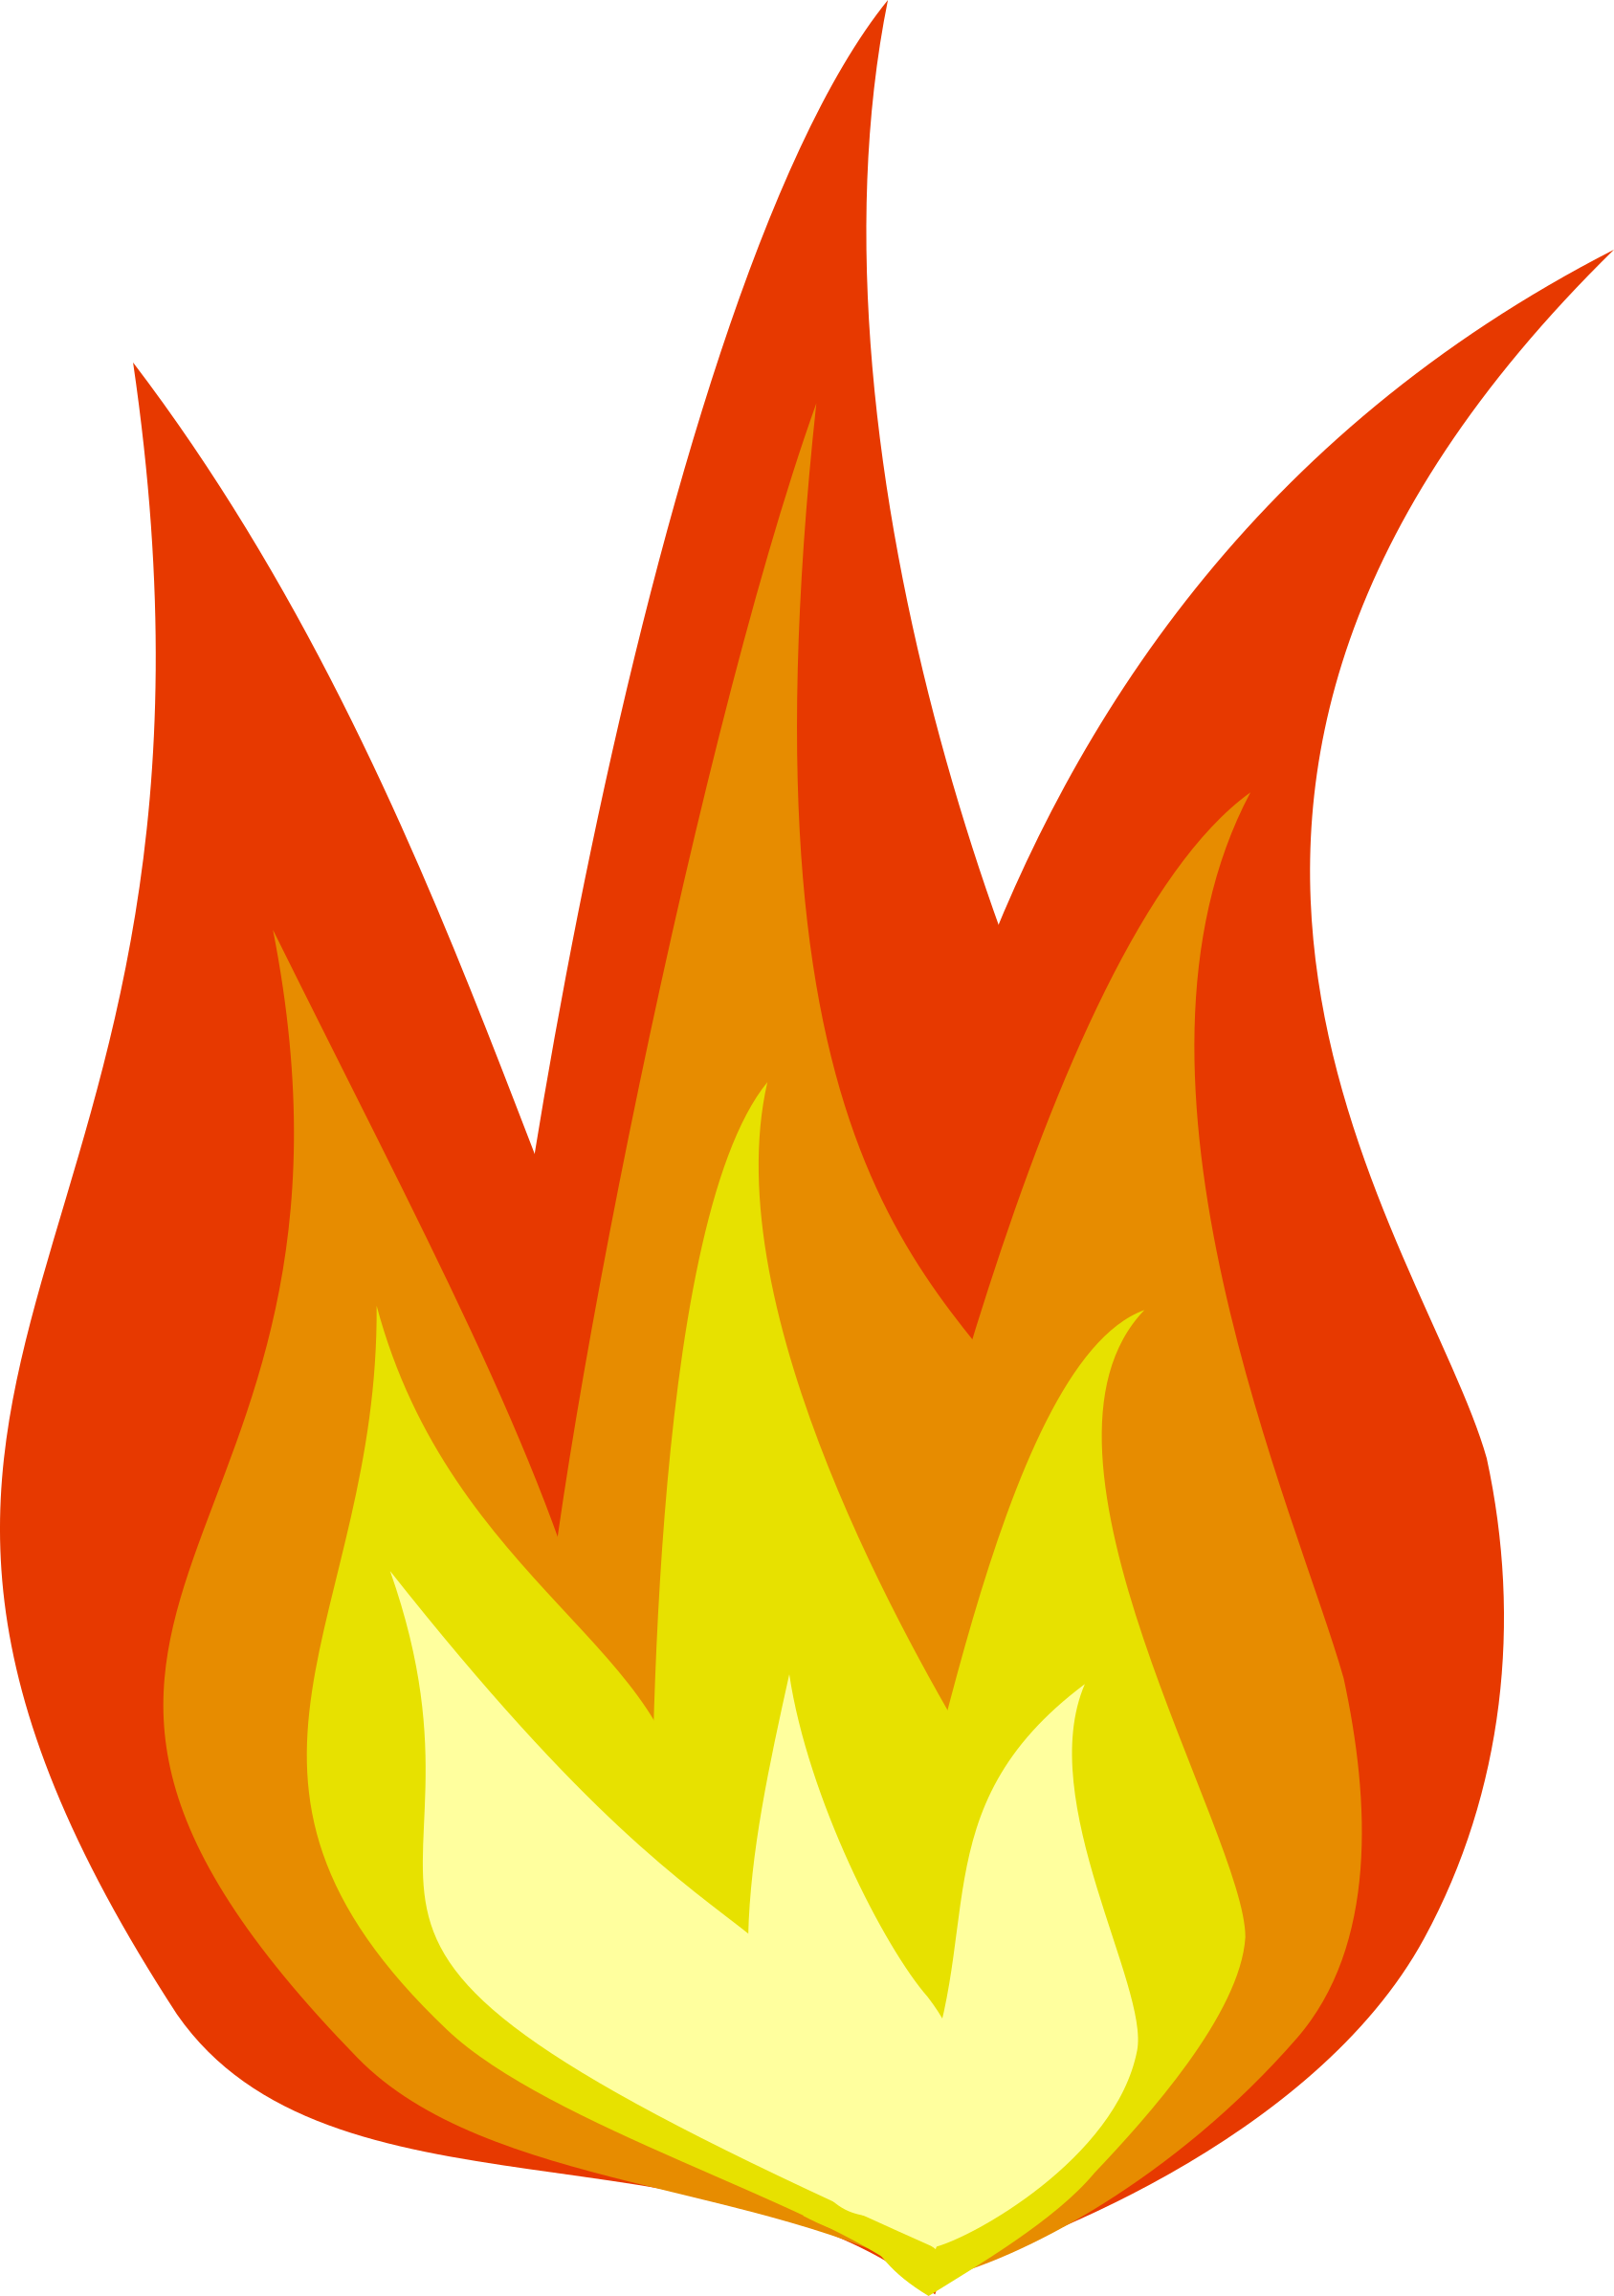 Fire images clip art. Flames clipart royalty free